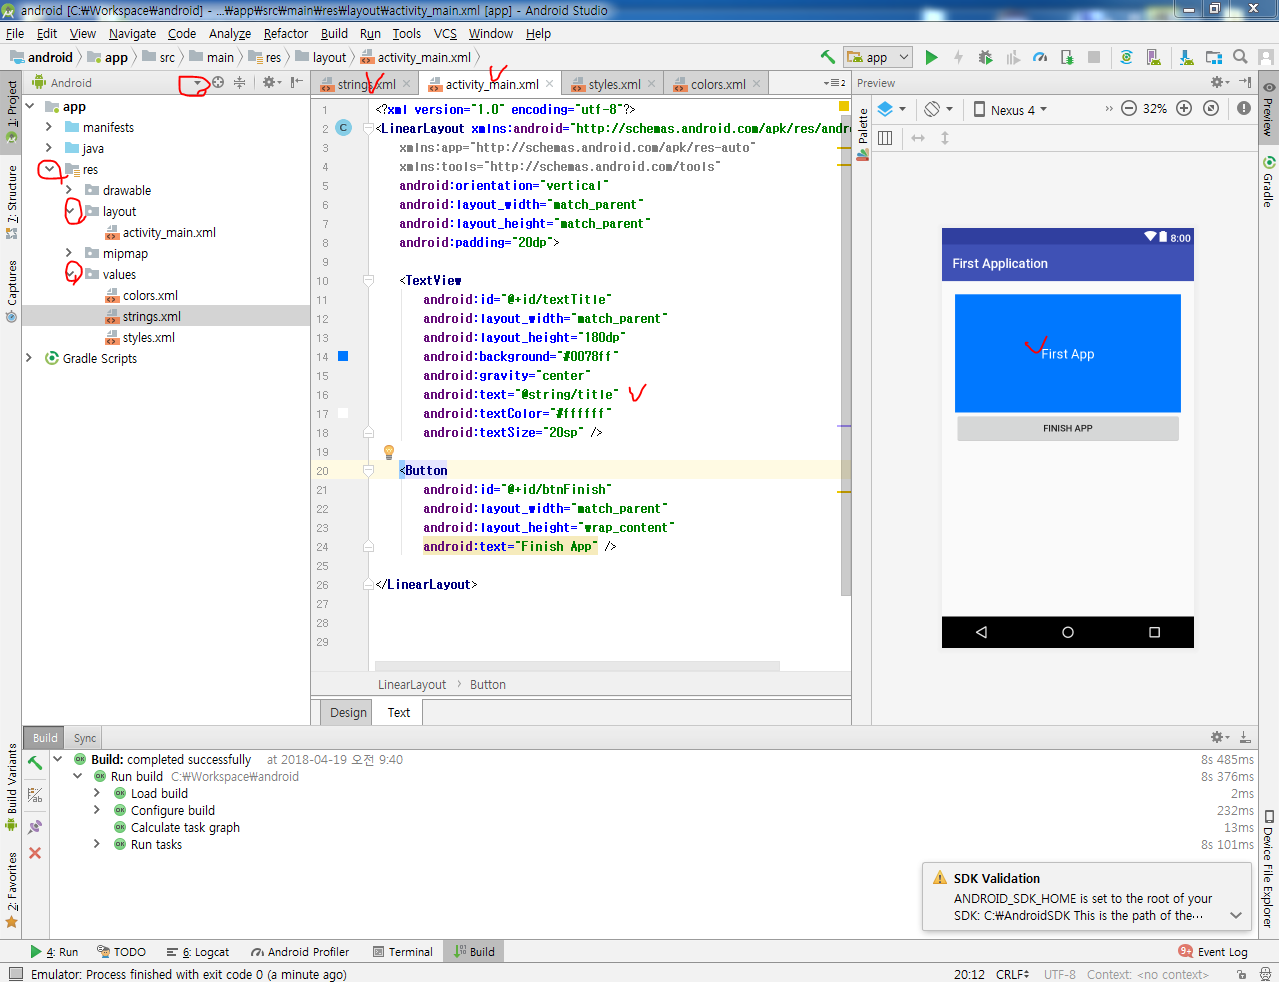 update android studio to 4.2